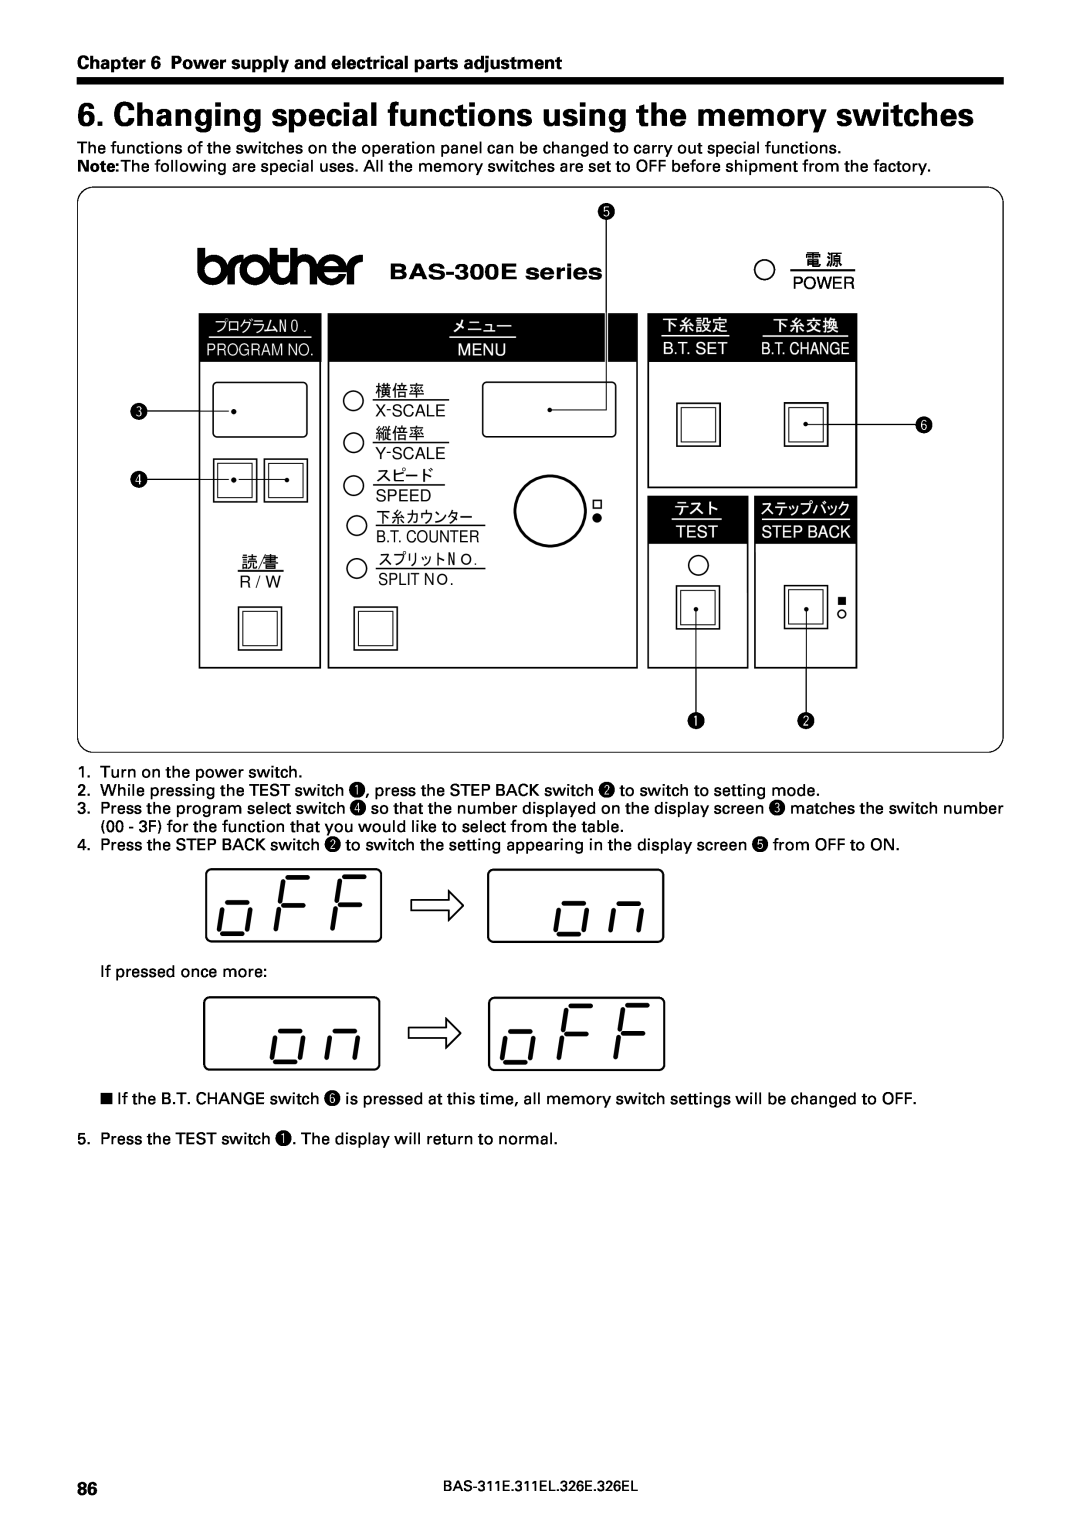 Brother BAS-311E Changing special functions using the memory switches, BAS-300E series, メニュー, Menu, 下糸設定 下糸交換, Test 